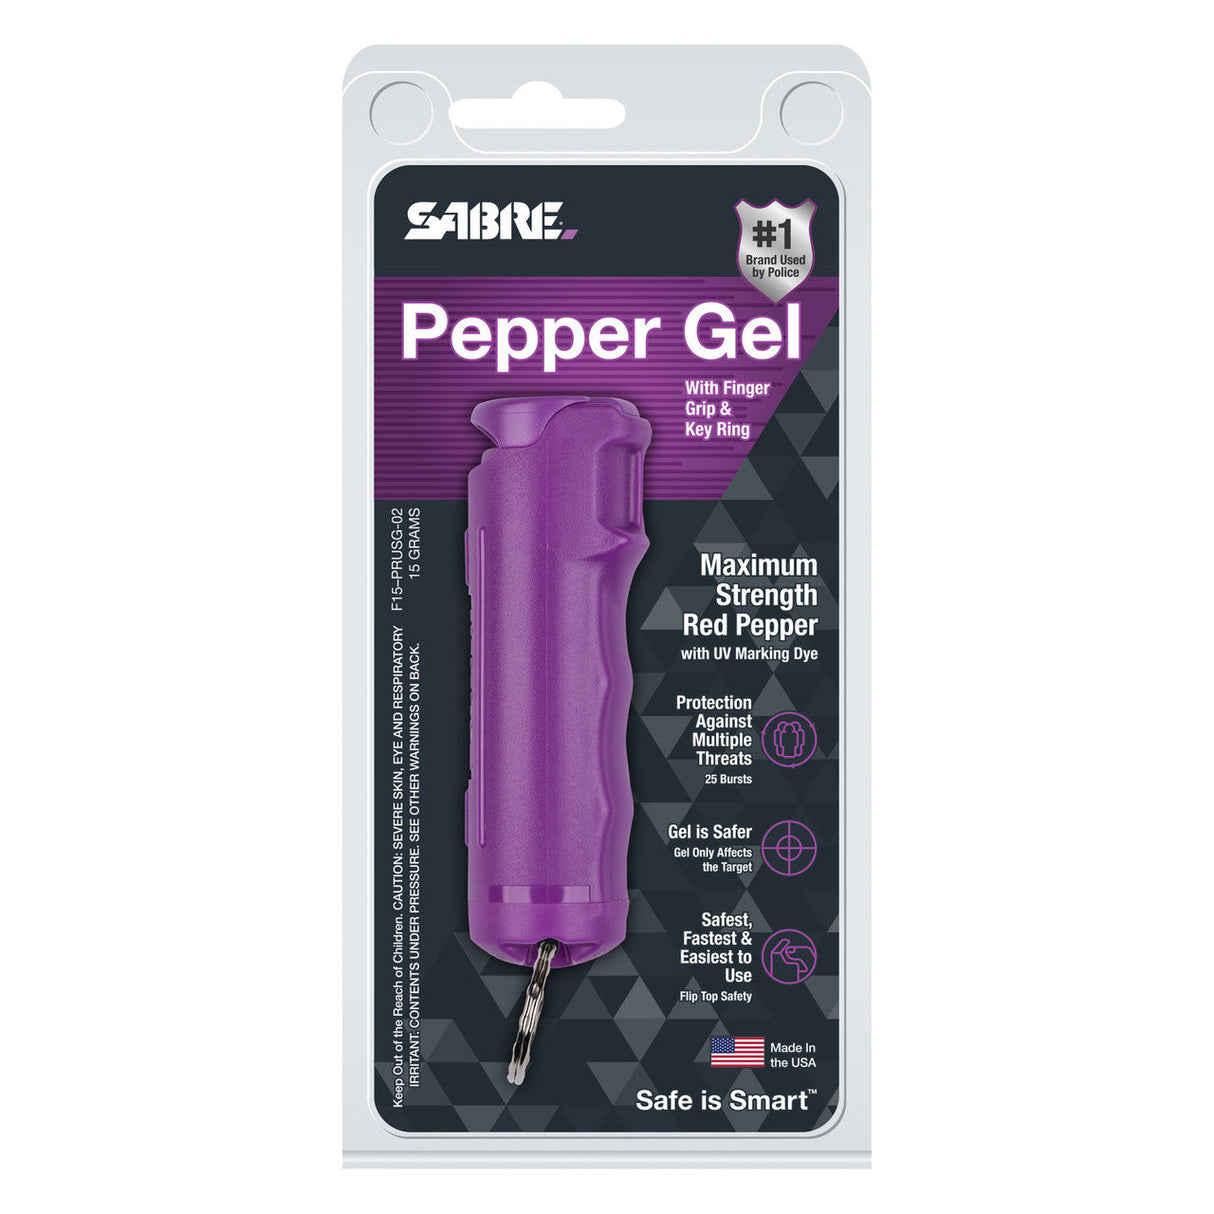 Pepper Gel with Flip Top and Key Ring